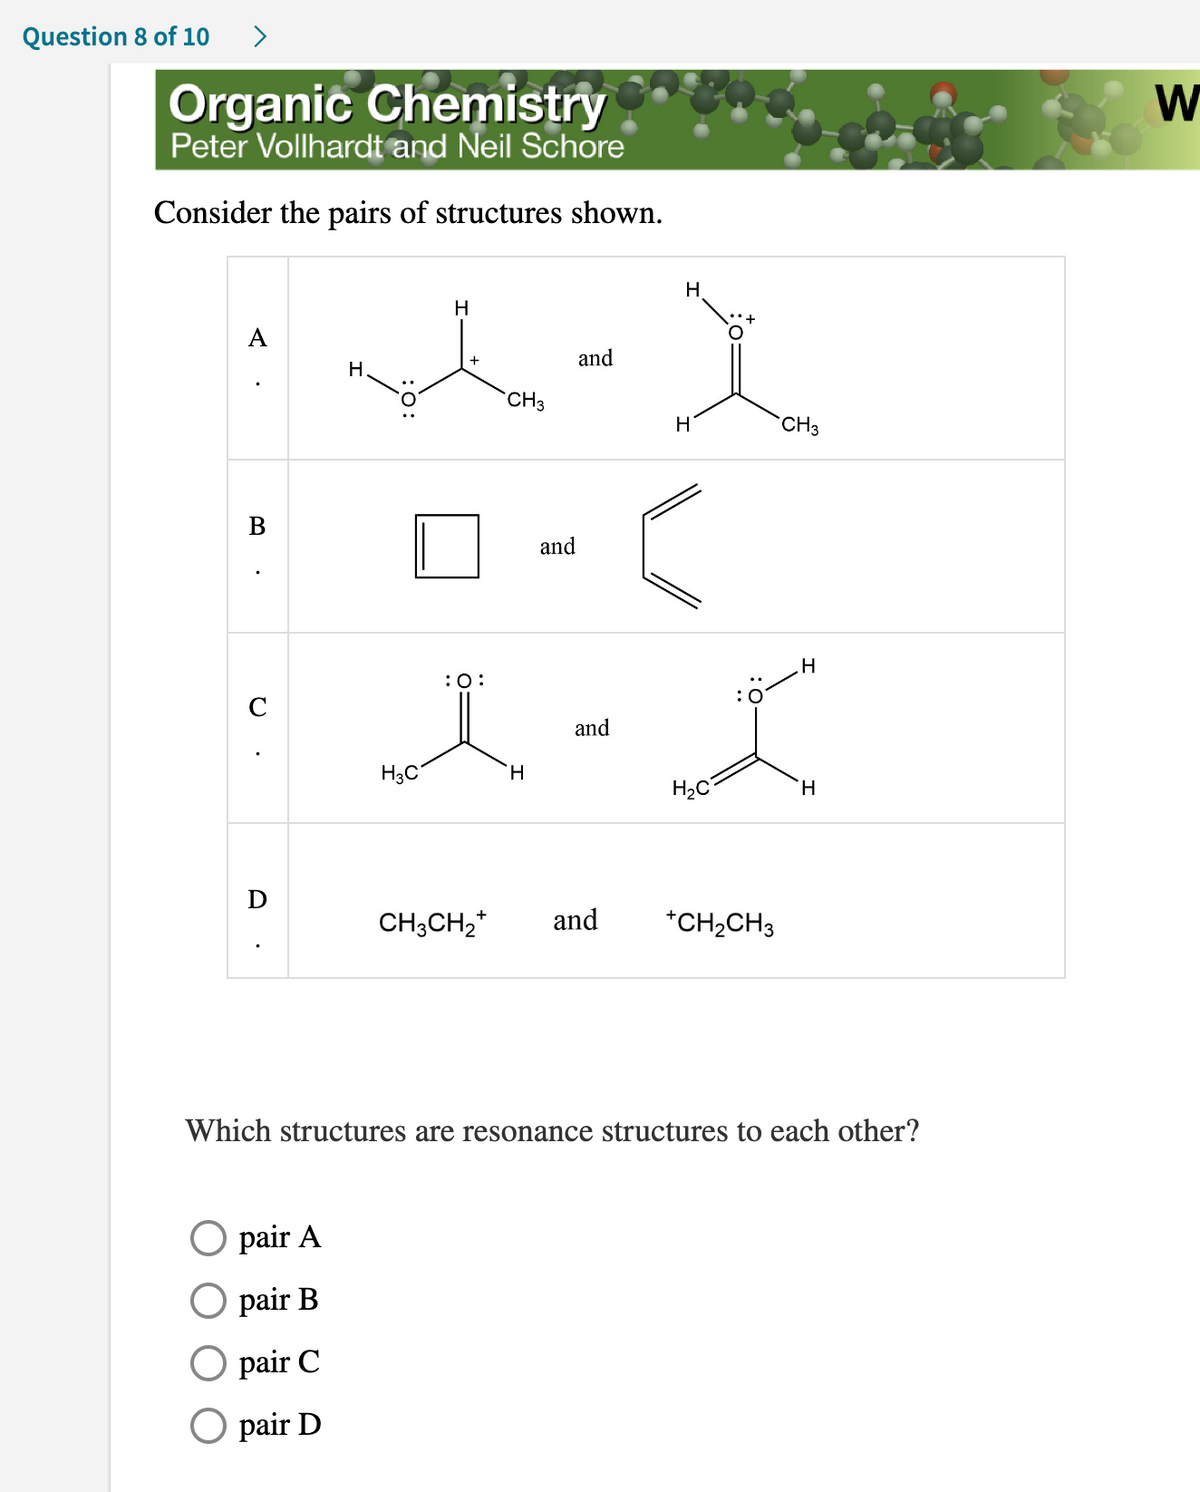 Question 8 of 10
>
Organic Chemistry
Peter Vollhardt and Neil Schore
Consider the pairs of structures shown.
H
M-)
and
CH3
A
C
D
H.
pair A
pair B
pair C
O pair D
H3C
:O:
H
and
and
CH3CH₂+ and
H
H
CH3
H
I
H₂C
H
+CH₂CH3
Which structures are resonance structures to each other?
W